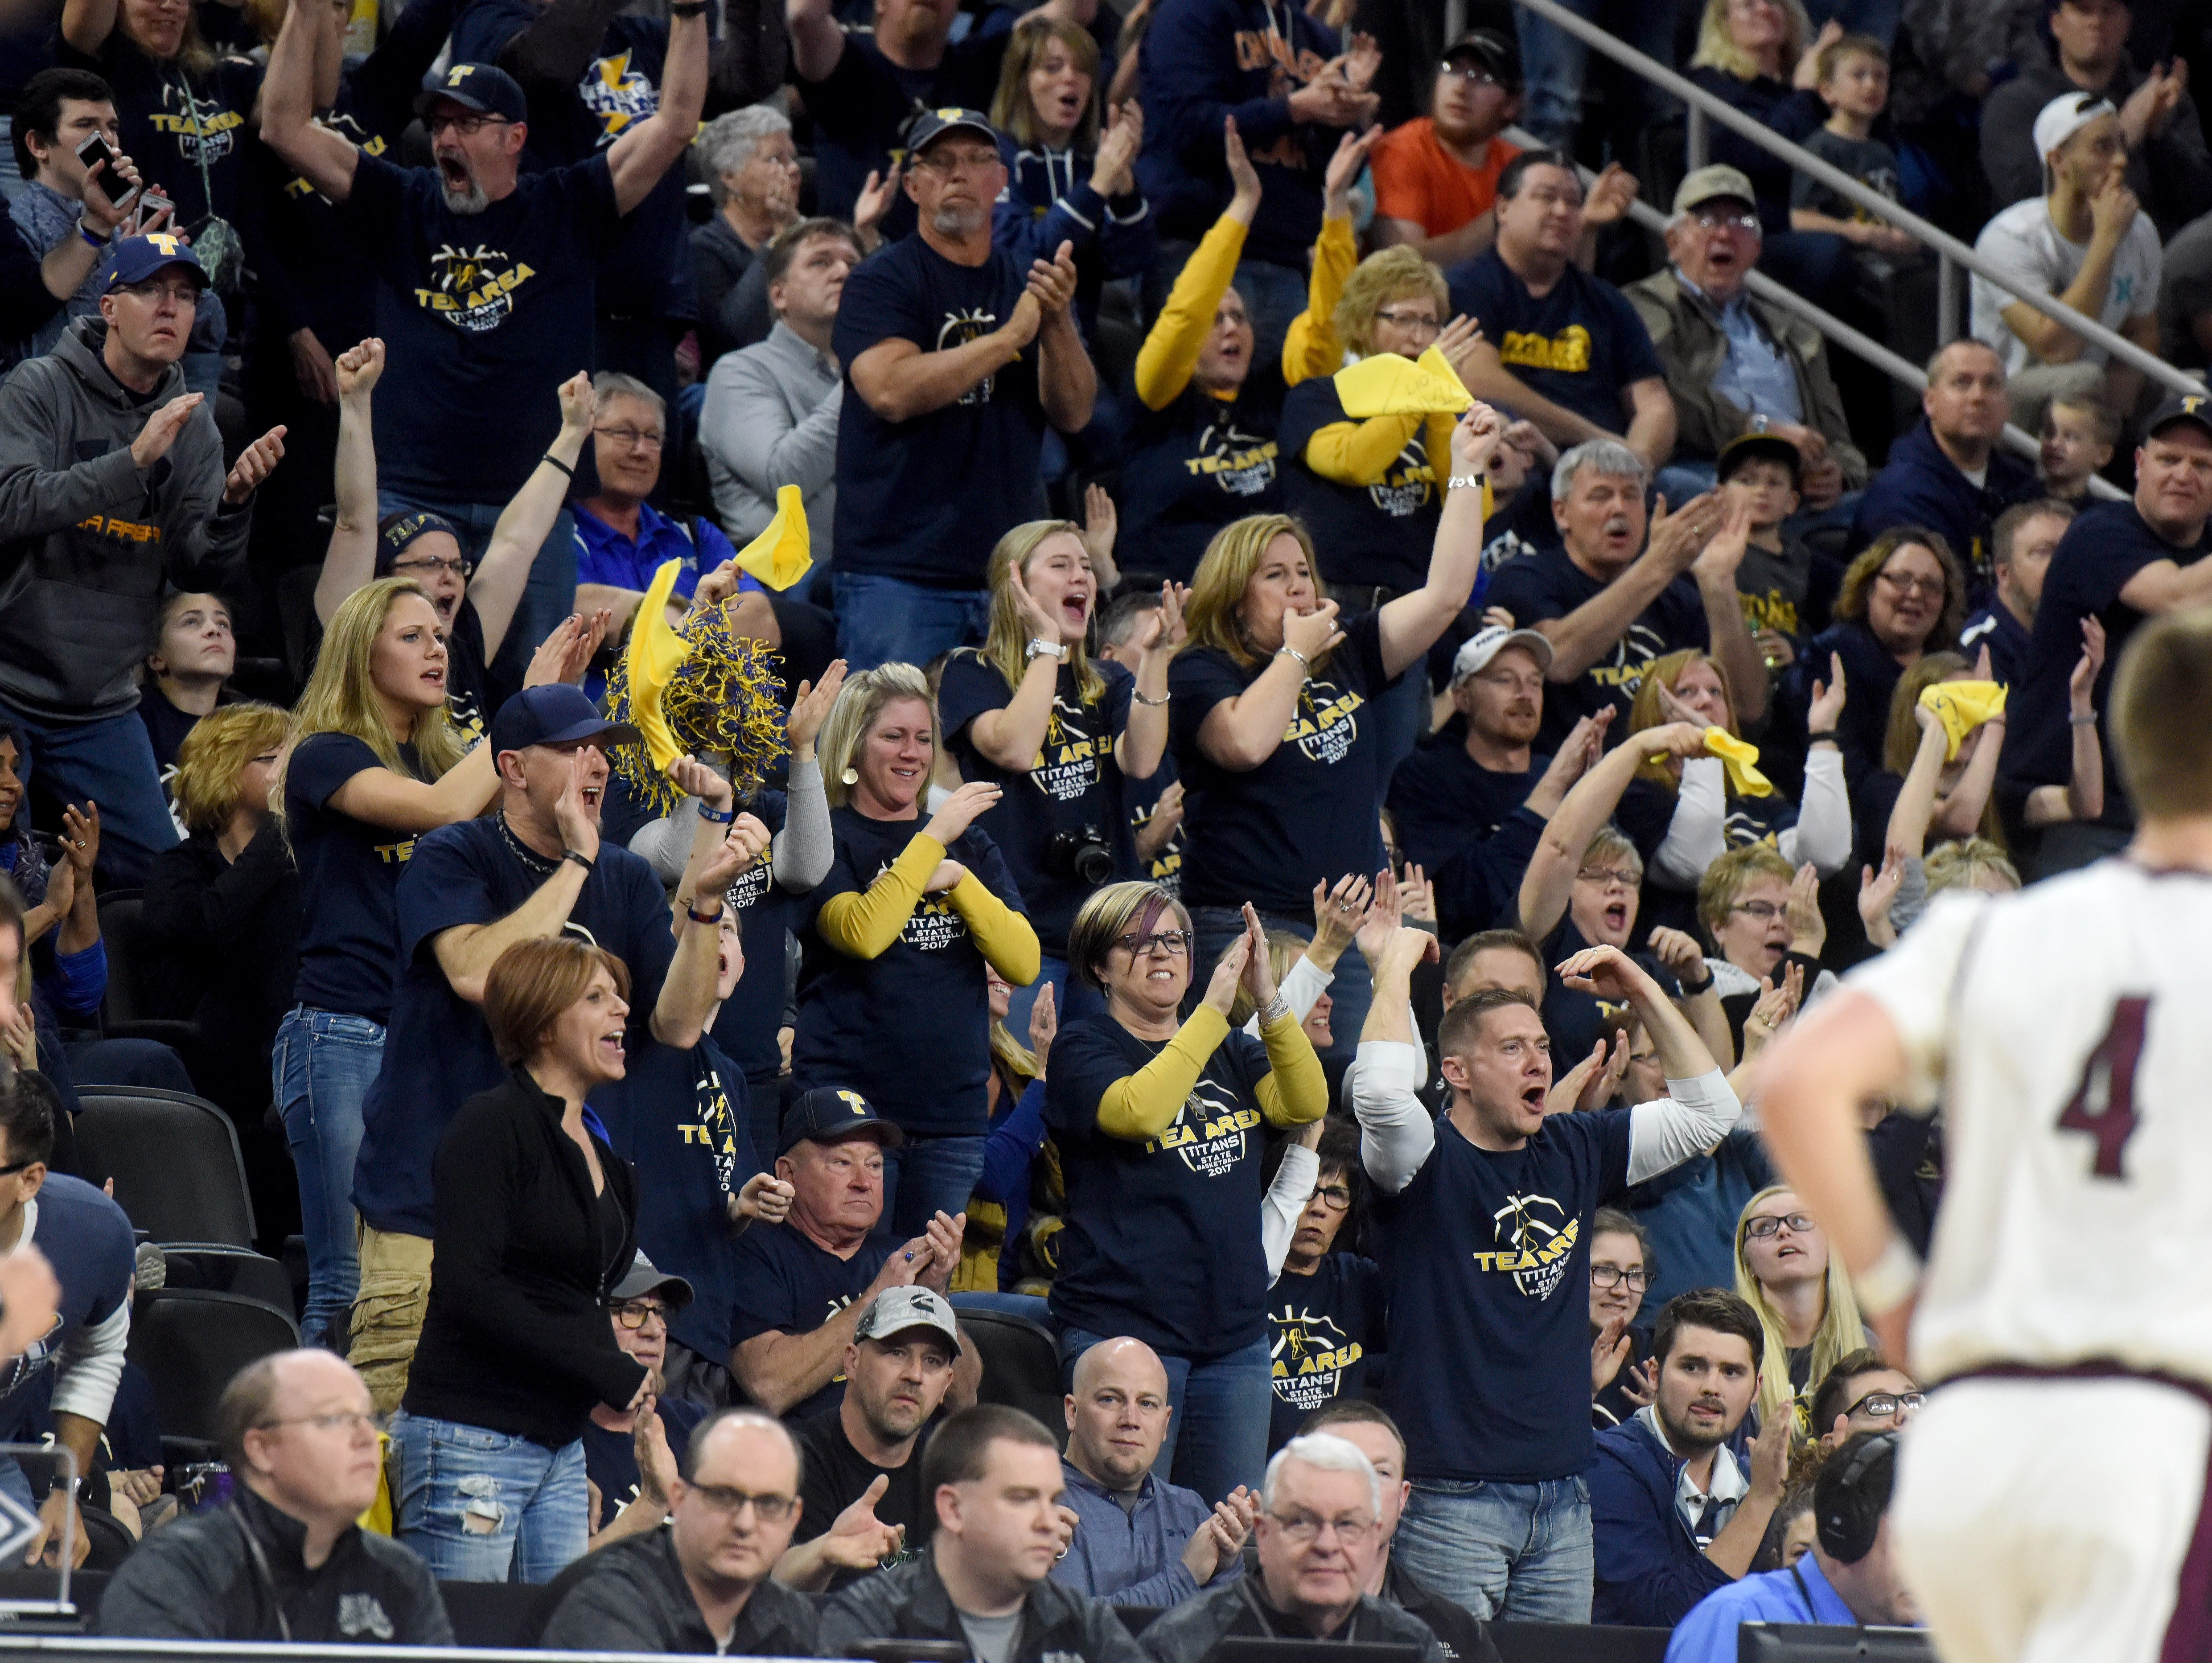 Tea Area fans go wild after scoring against Madison during the 2017 SDHSAA Class A boy's basketball championship at the Denny Sanford Premier Center on Saturday, March 18, 2017.